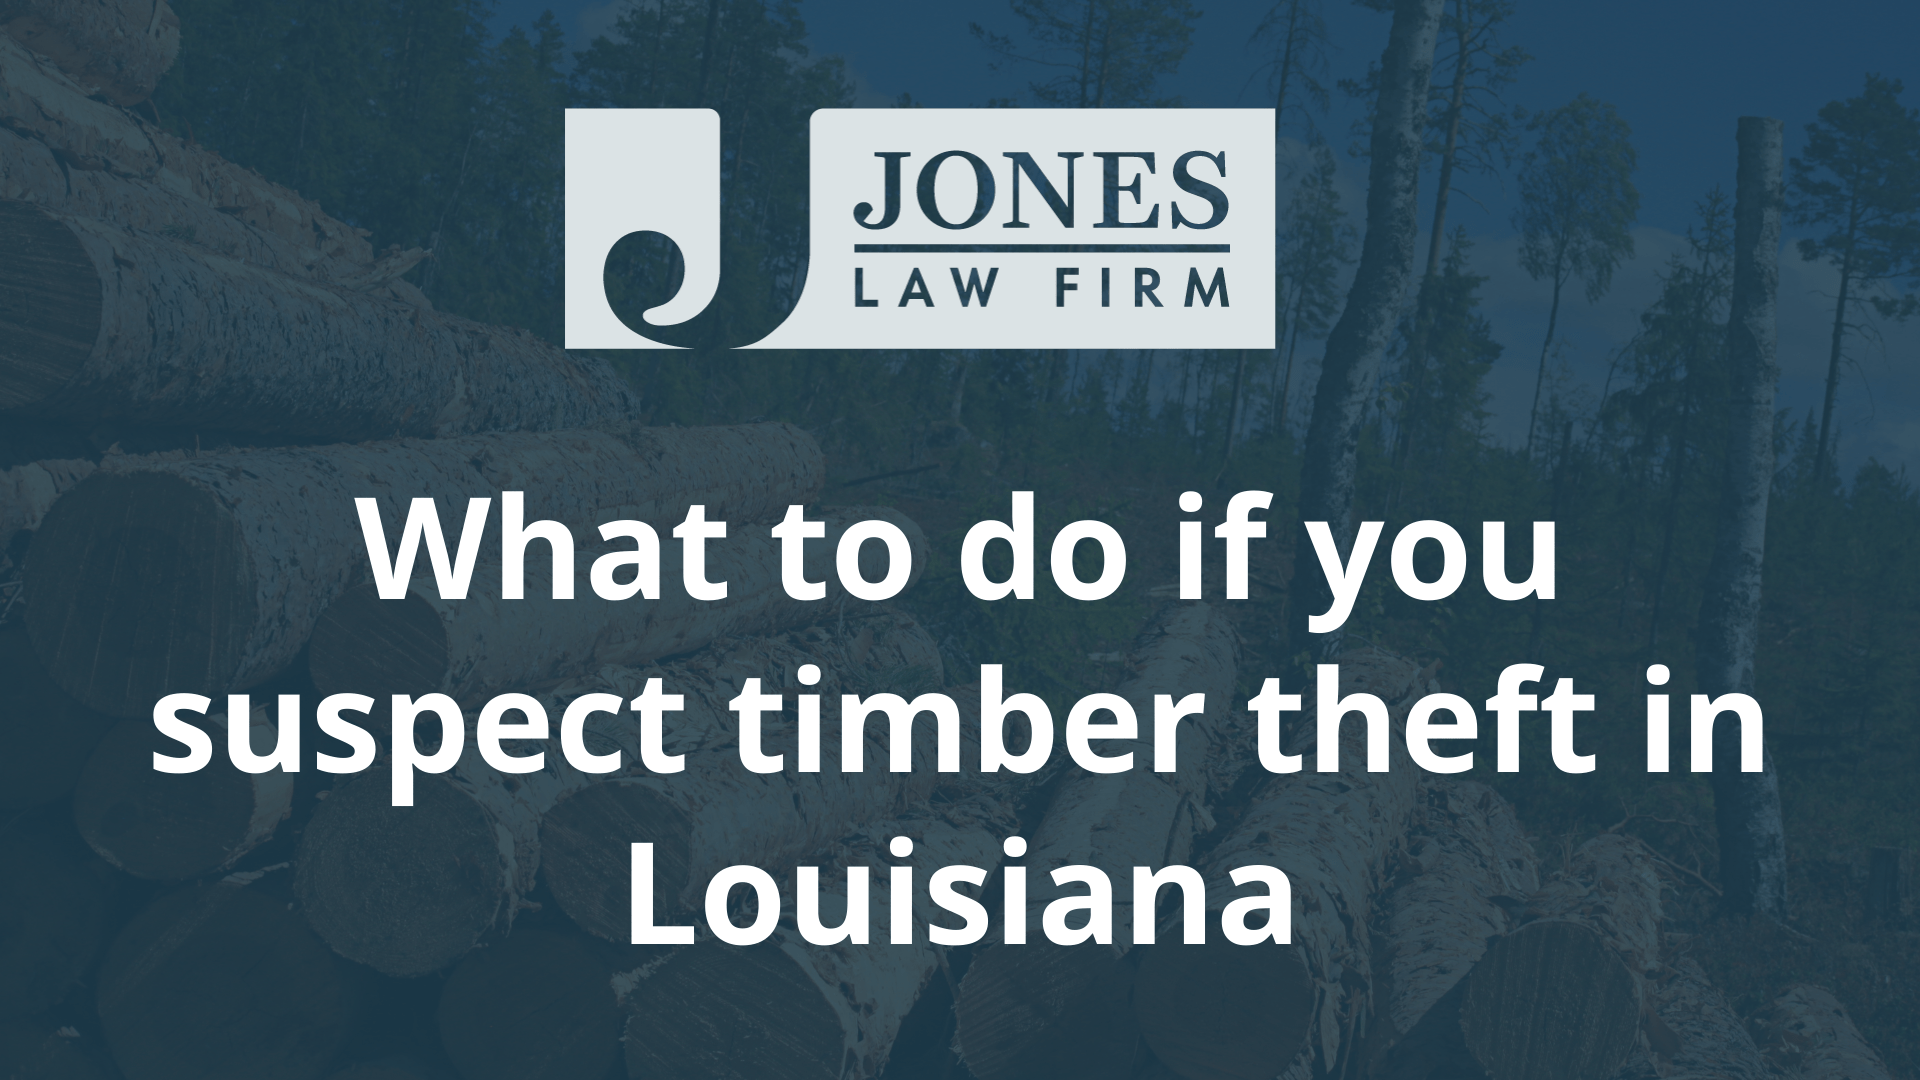 What to do if you suspect timber theft in Louisiana - jones law firm - louisiana